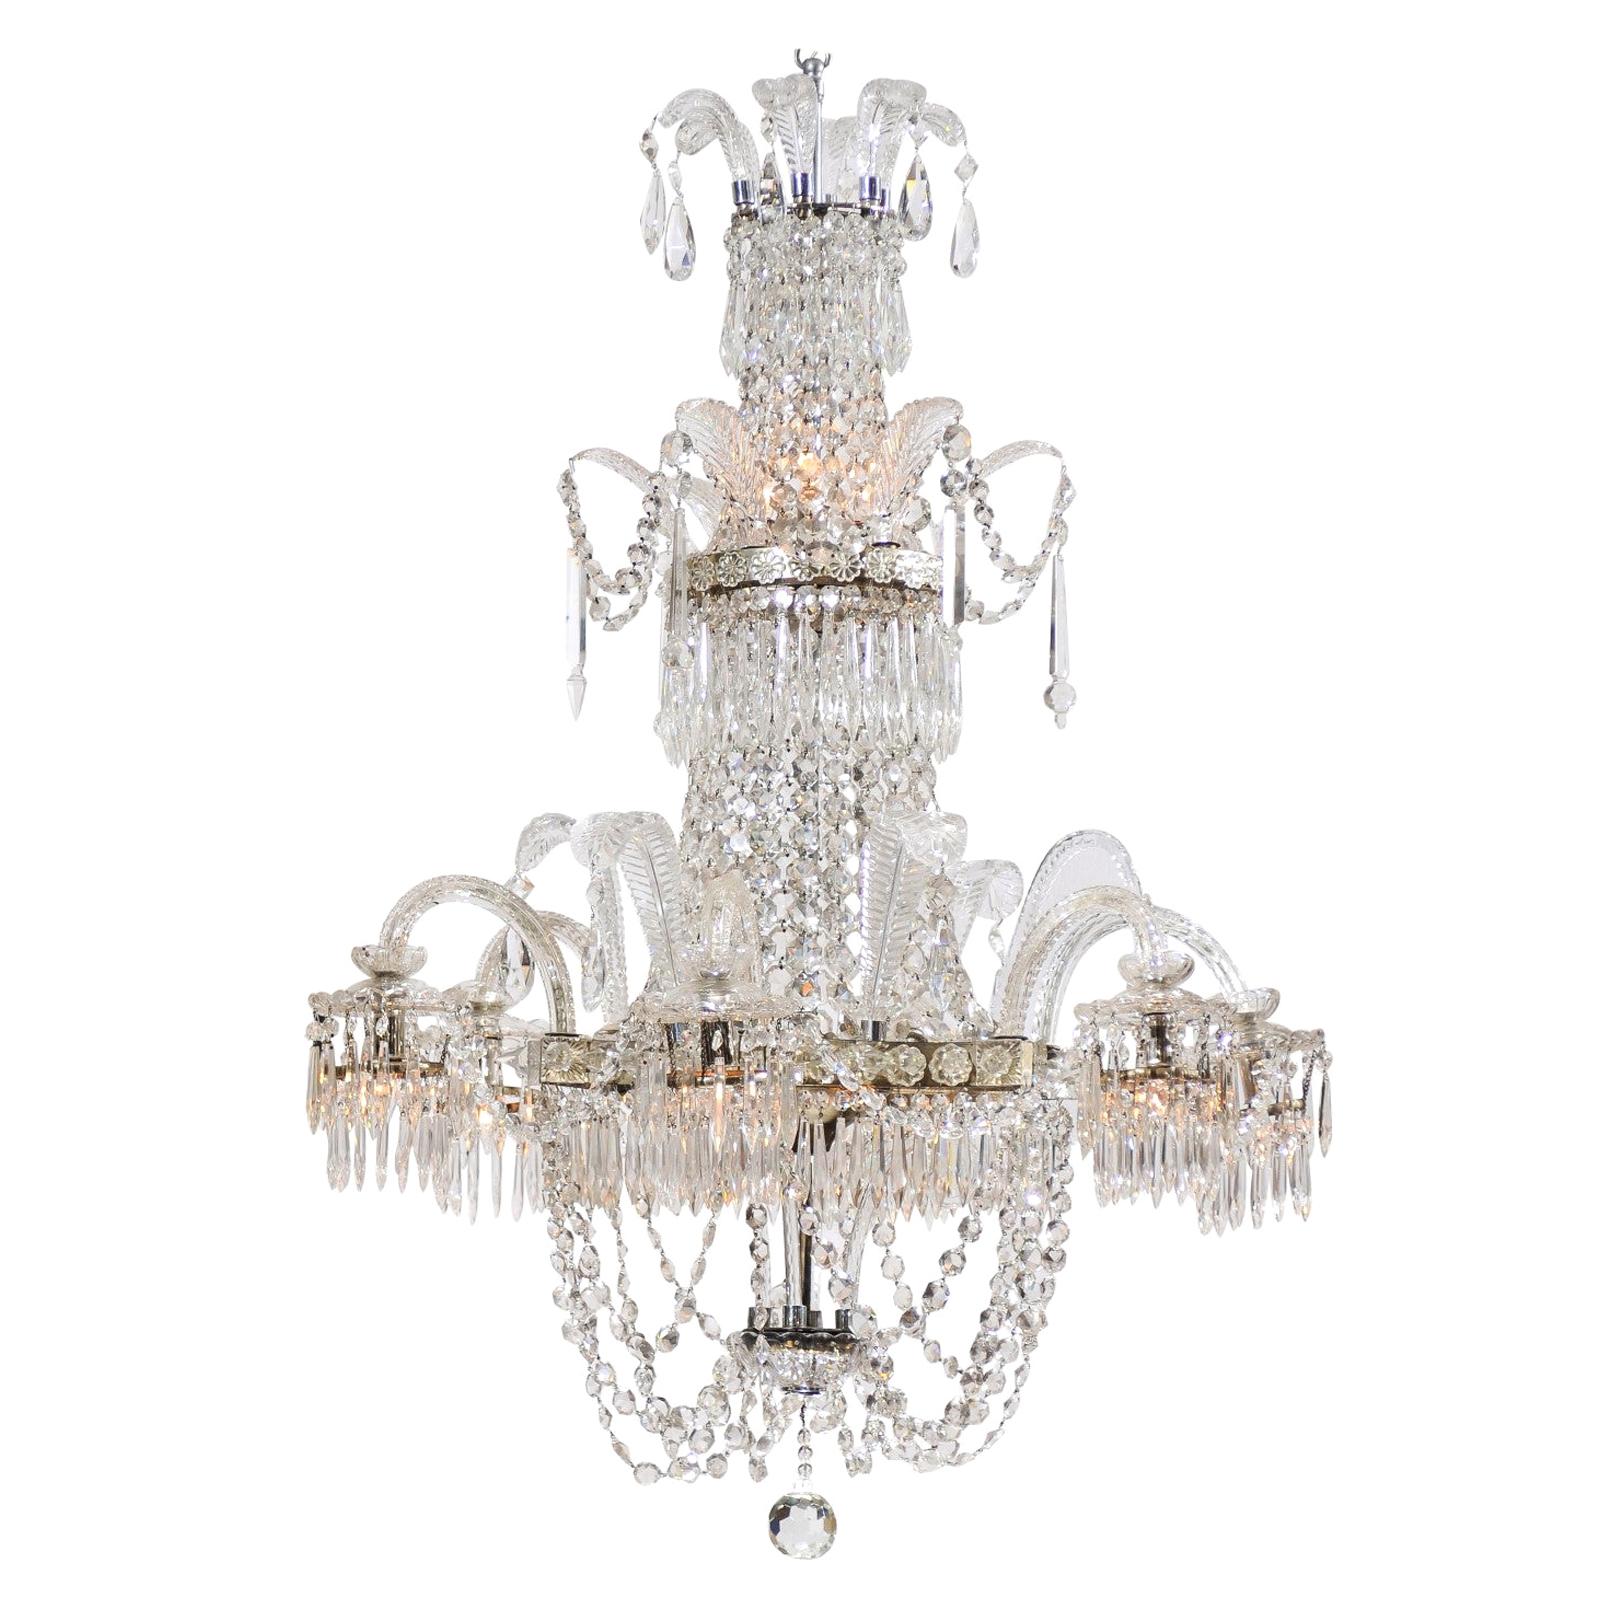 Large Crystal Arm Chandelier with 6 Downturned Lights, Continental circa 1900